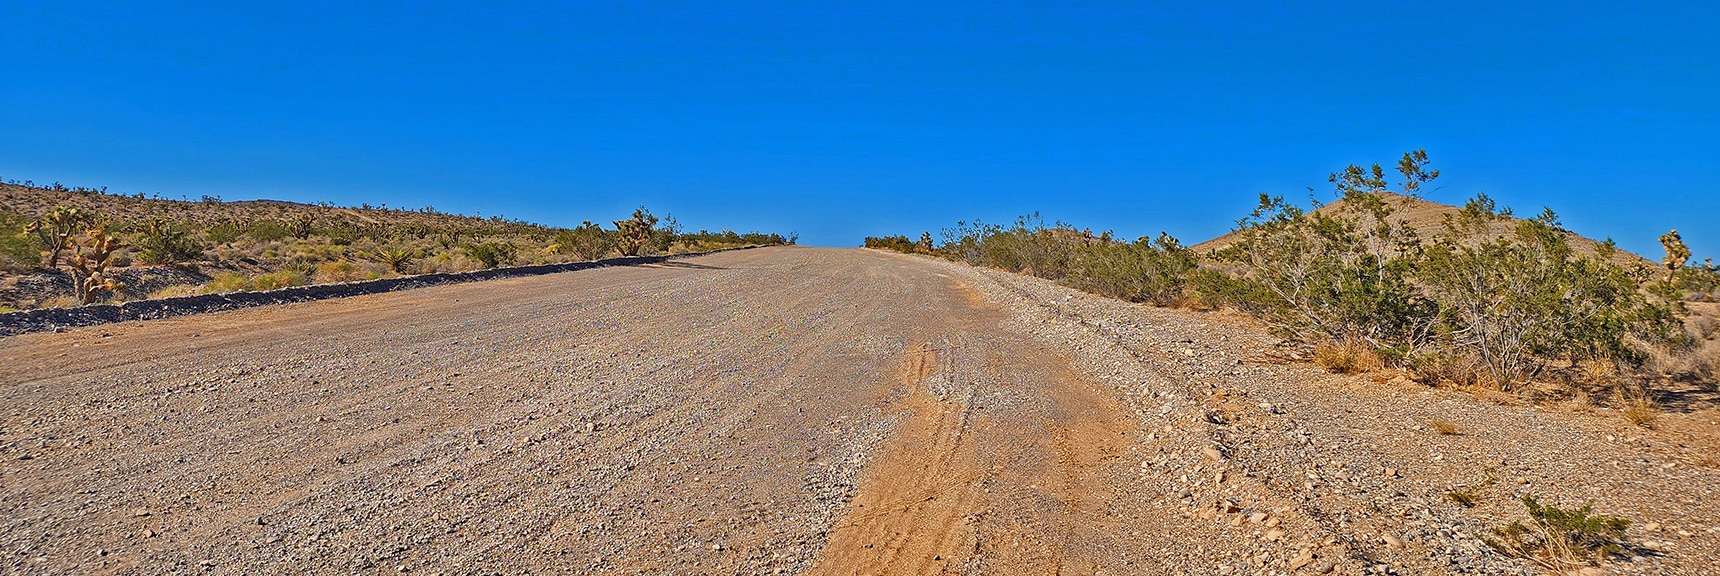 This is That Straight Stretch of Road Just Viewed from Above | Kyle Canyon Grand Crossing | Northern Half | La Madre Mountains Wilderness, Nevada